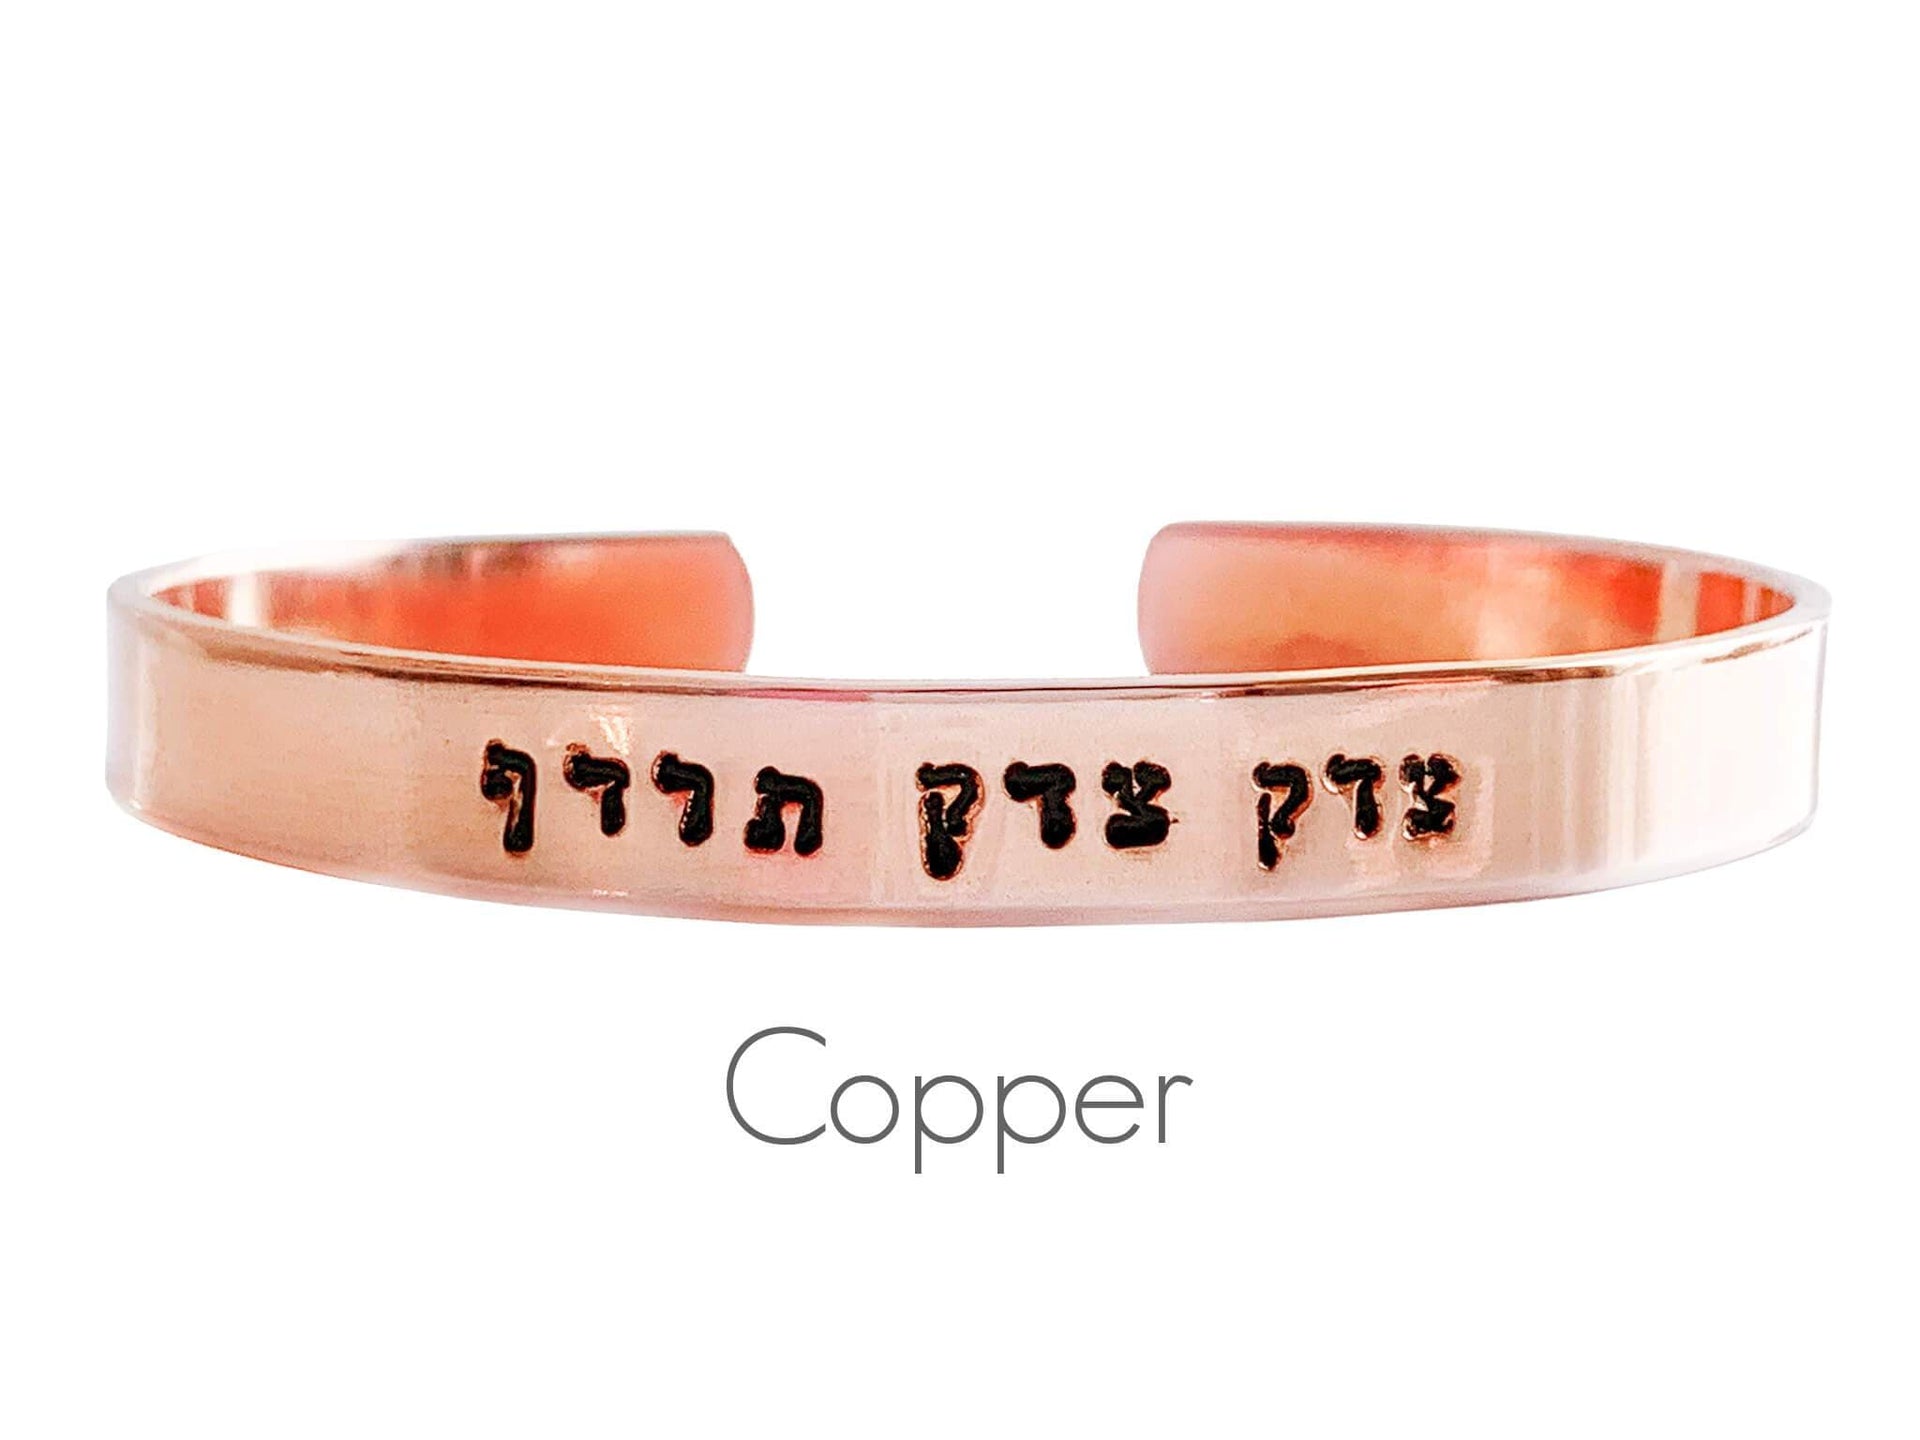 Everything Beautiful Bracelets Copper Justice, Justice Shall You Pursue Bracelet - Brass, Copper or Aluminum